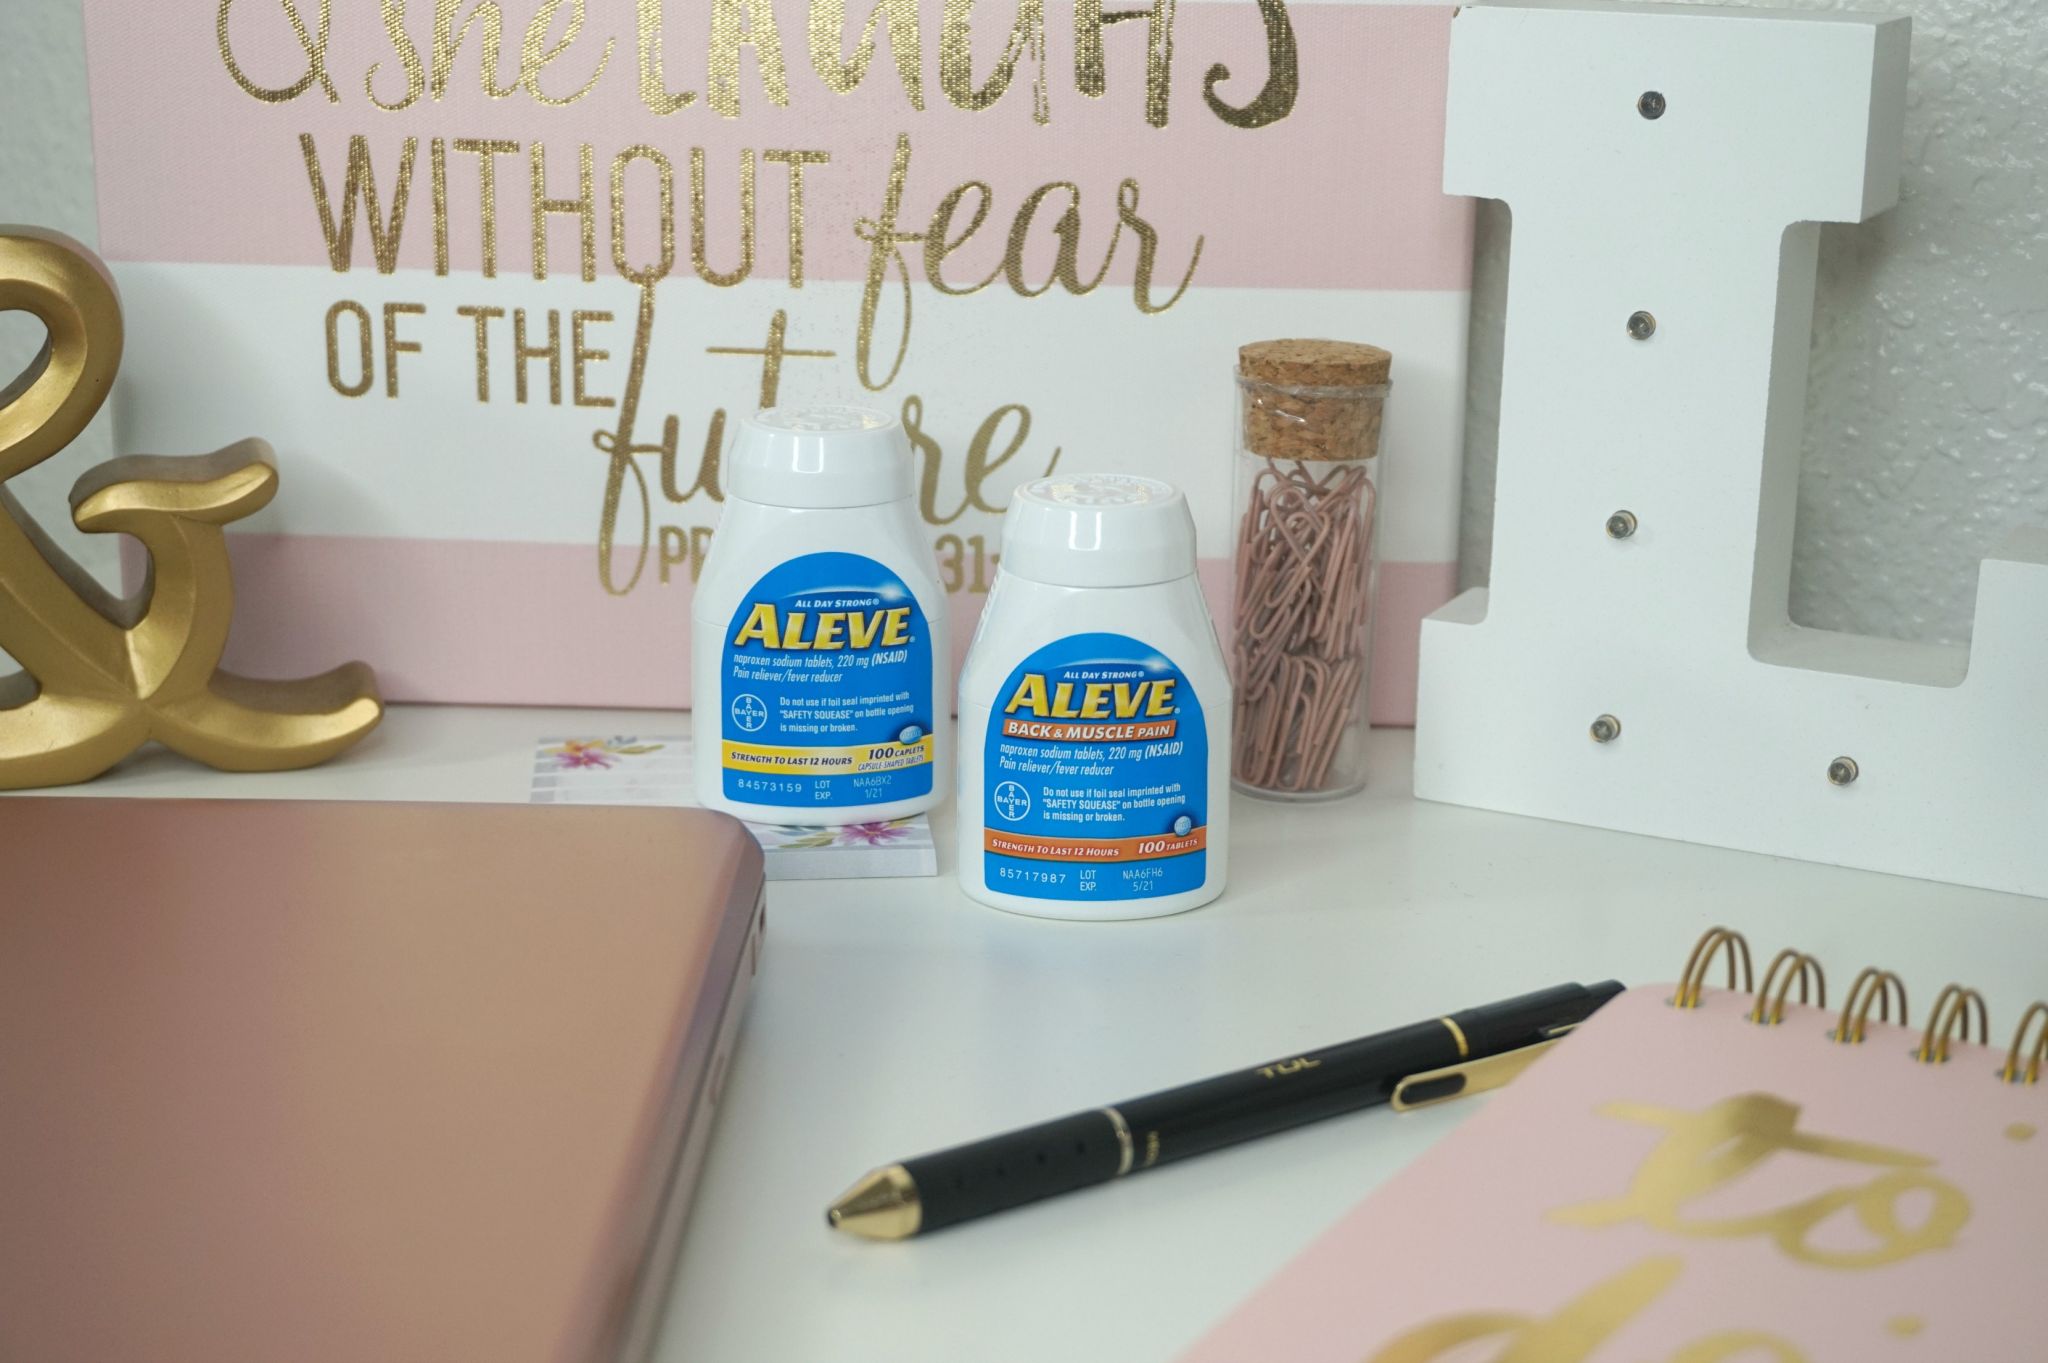 Day In The Life Of A Bloggers Weekend // Blogger Tips // Blogging 101 | Beauty With Lily #ad #NeverBackDown #Aleve